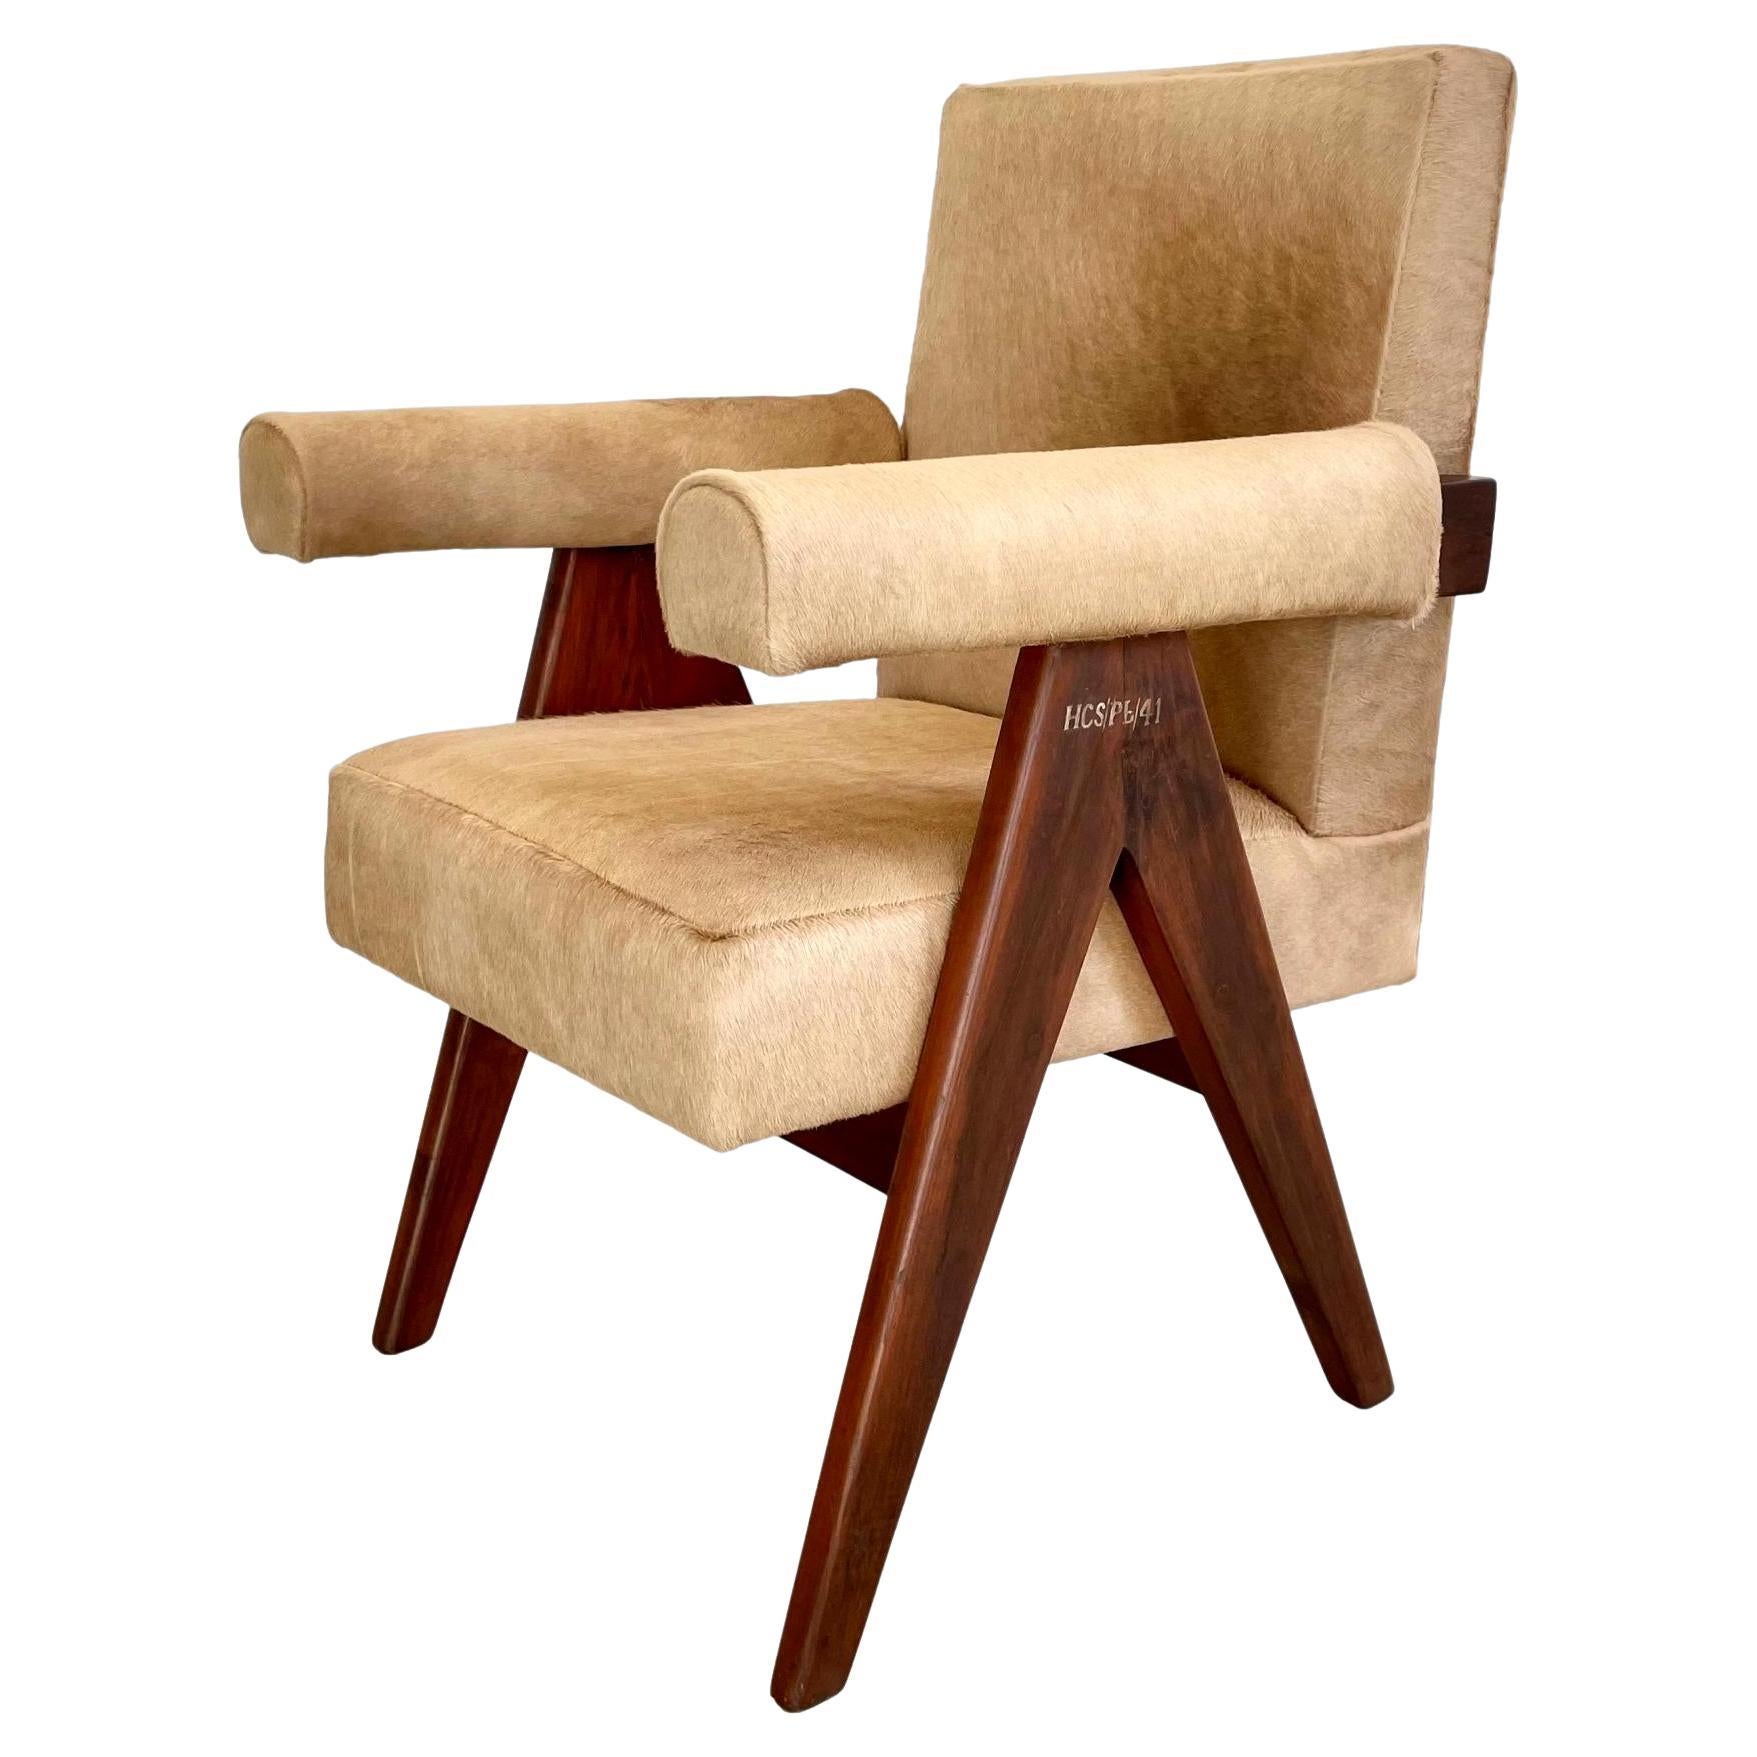 Pierre Jeanneret Senate Chair in Cowhide, 1950s Chandigargh